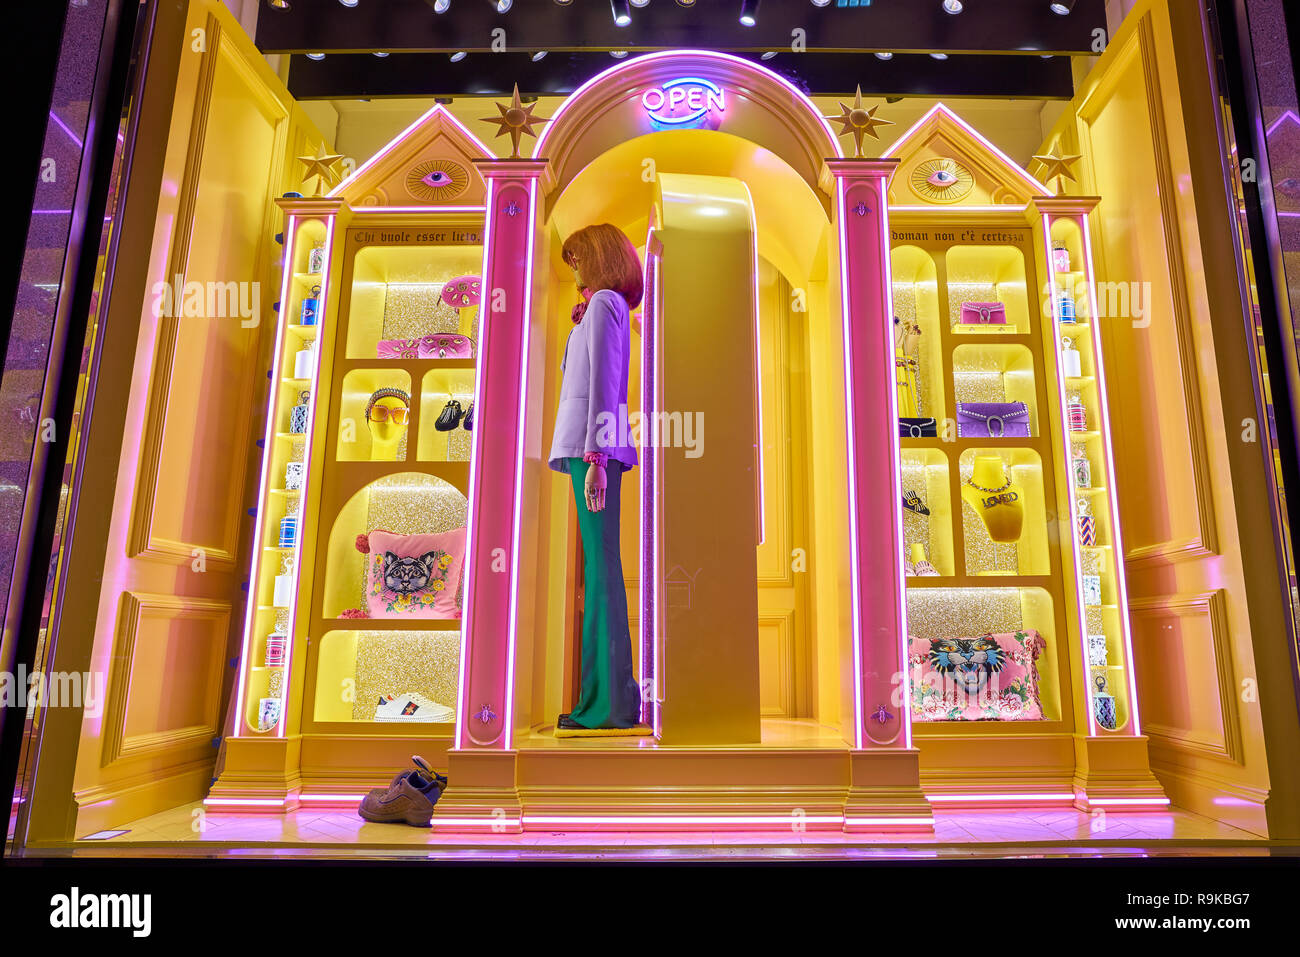 A Gucci window is seen as part of the World Fashion Window Displays News  Photo - Getty Images